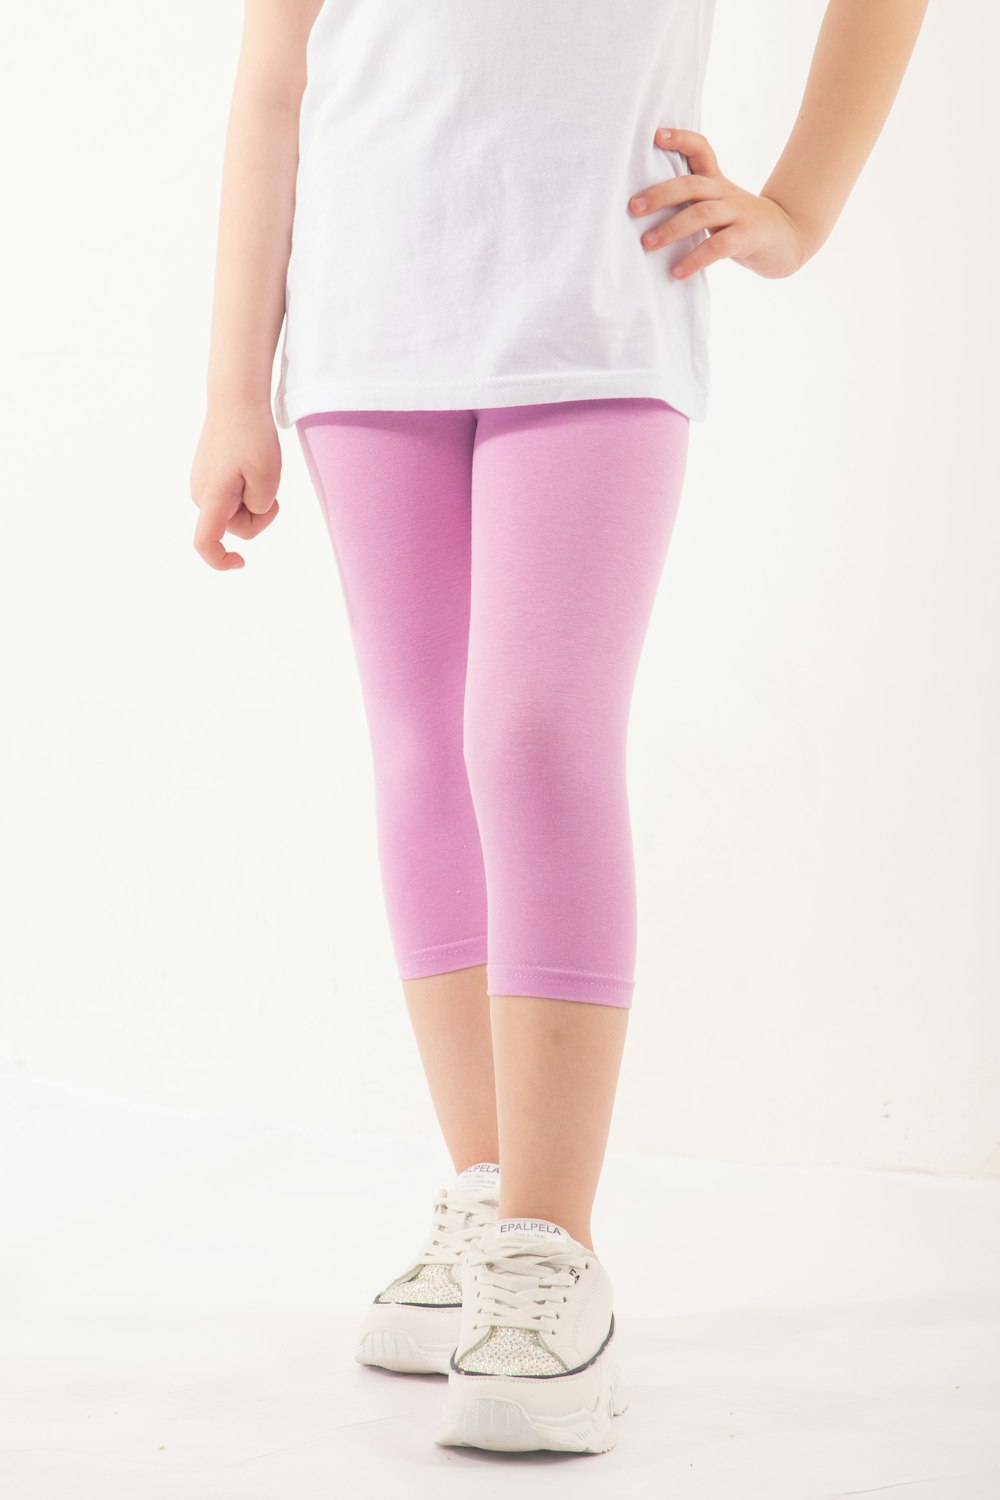 a little girl in a white shirt and pink leggings